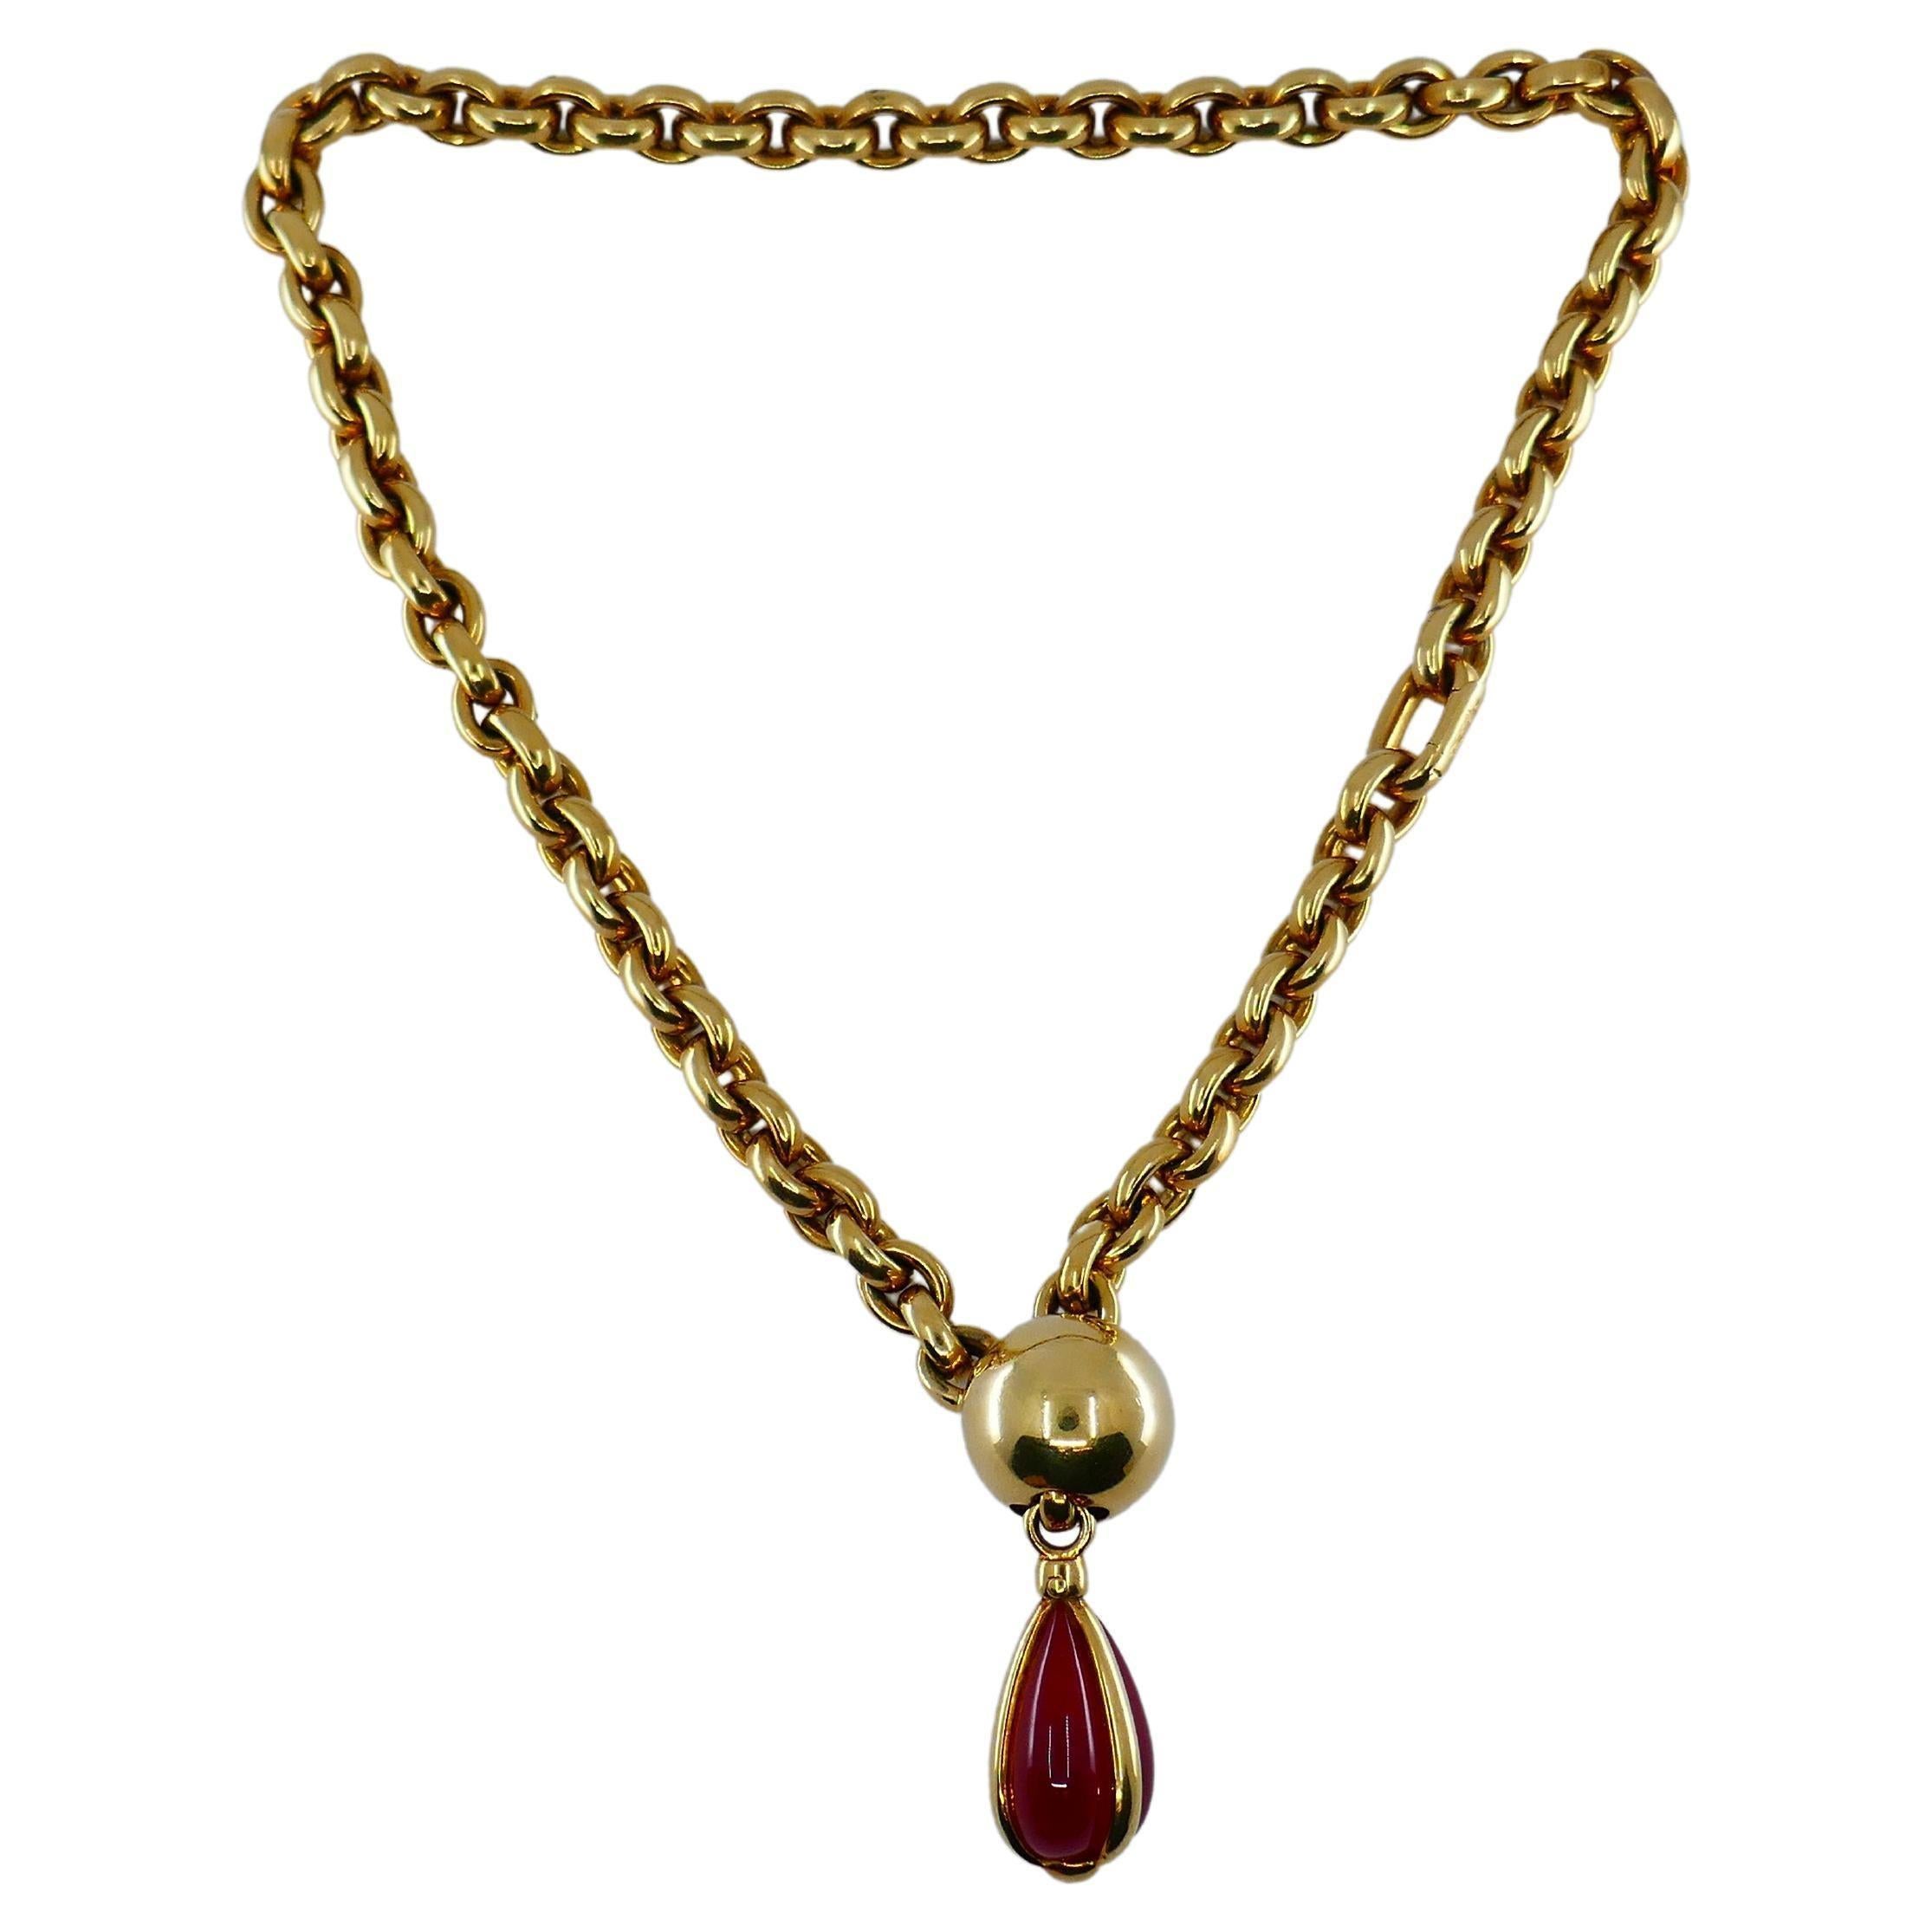 A spectacular Pomellato 18k gold lariat chain necklace with a carnelian pendant.
The lariat part is designed as a polished gold ball. It rhymes with the massive tear-shape carnelian pendant. The stone is staged in three gold bands that 